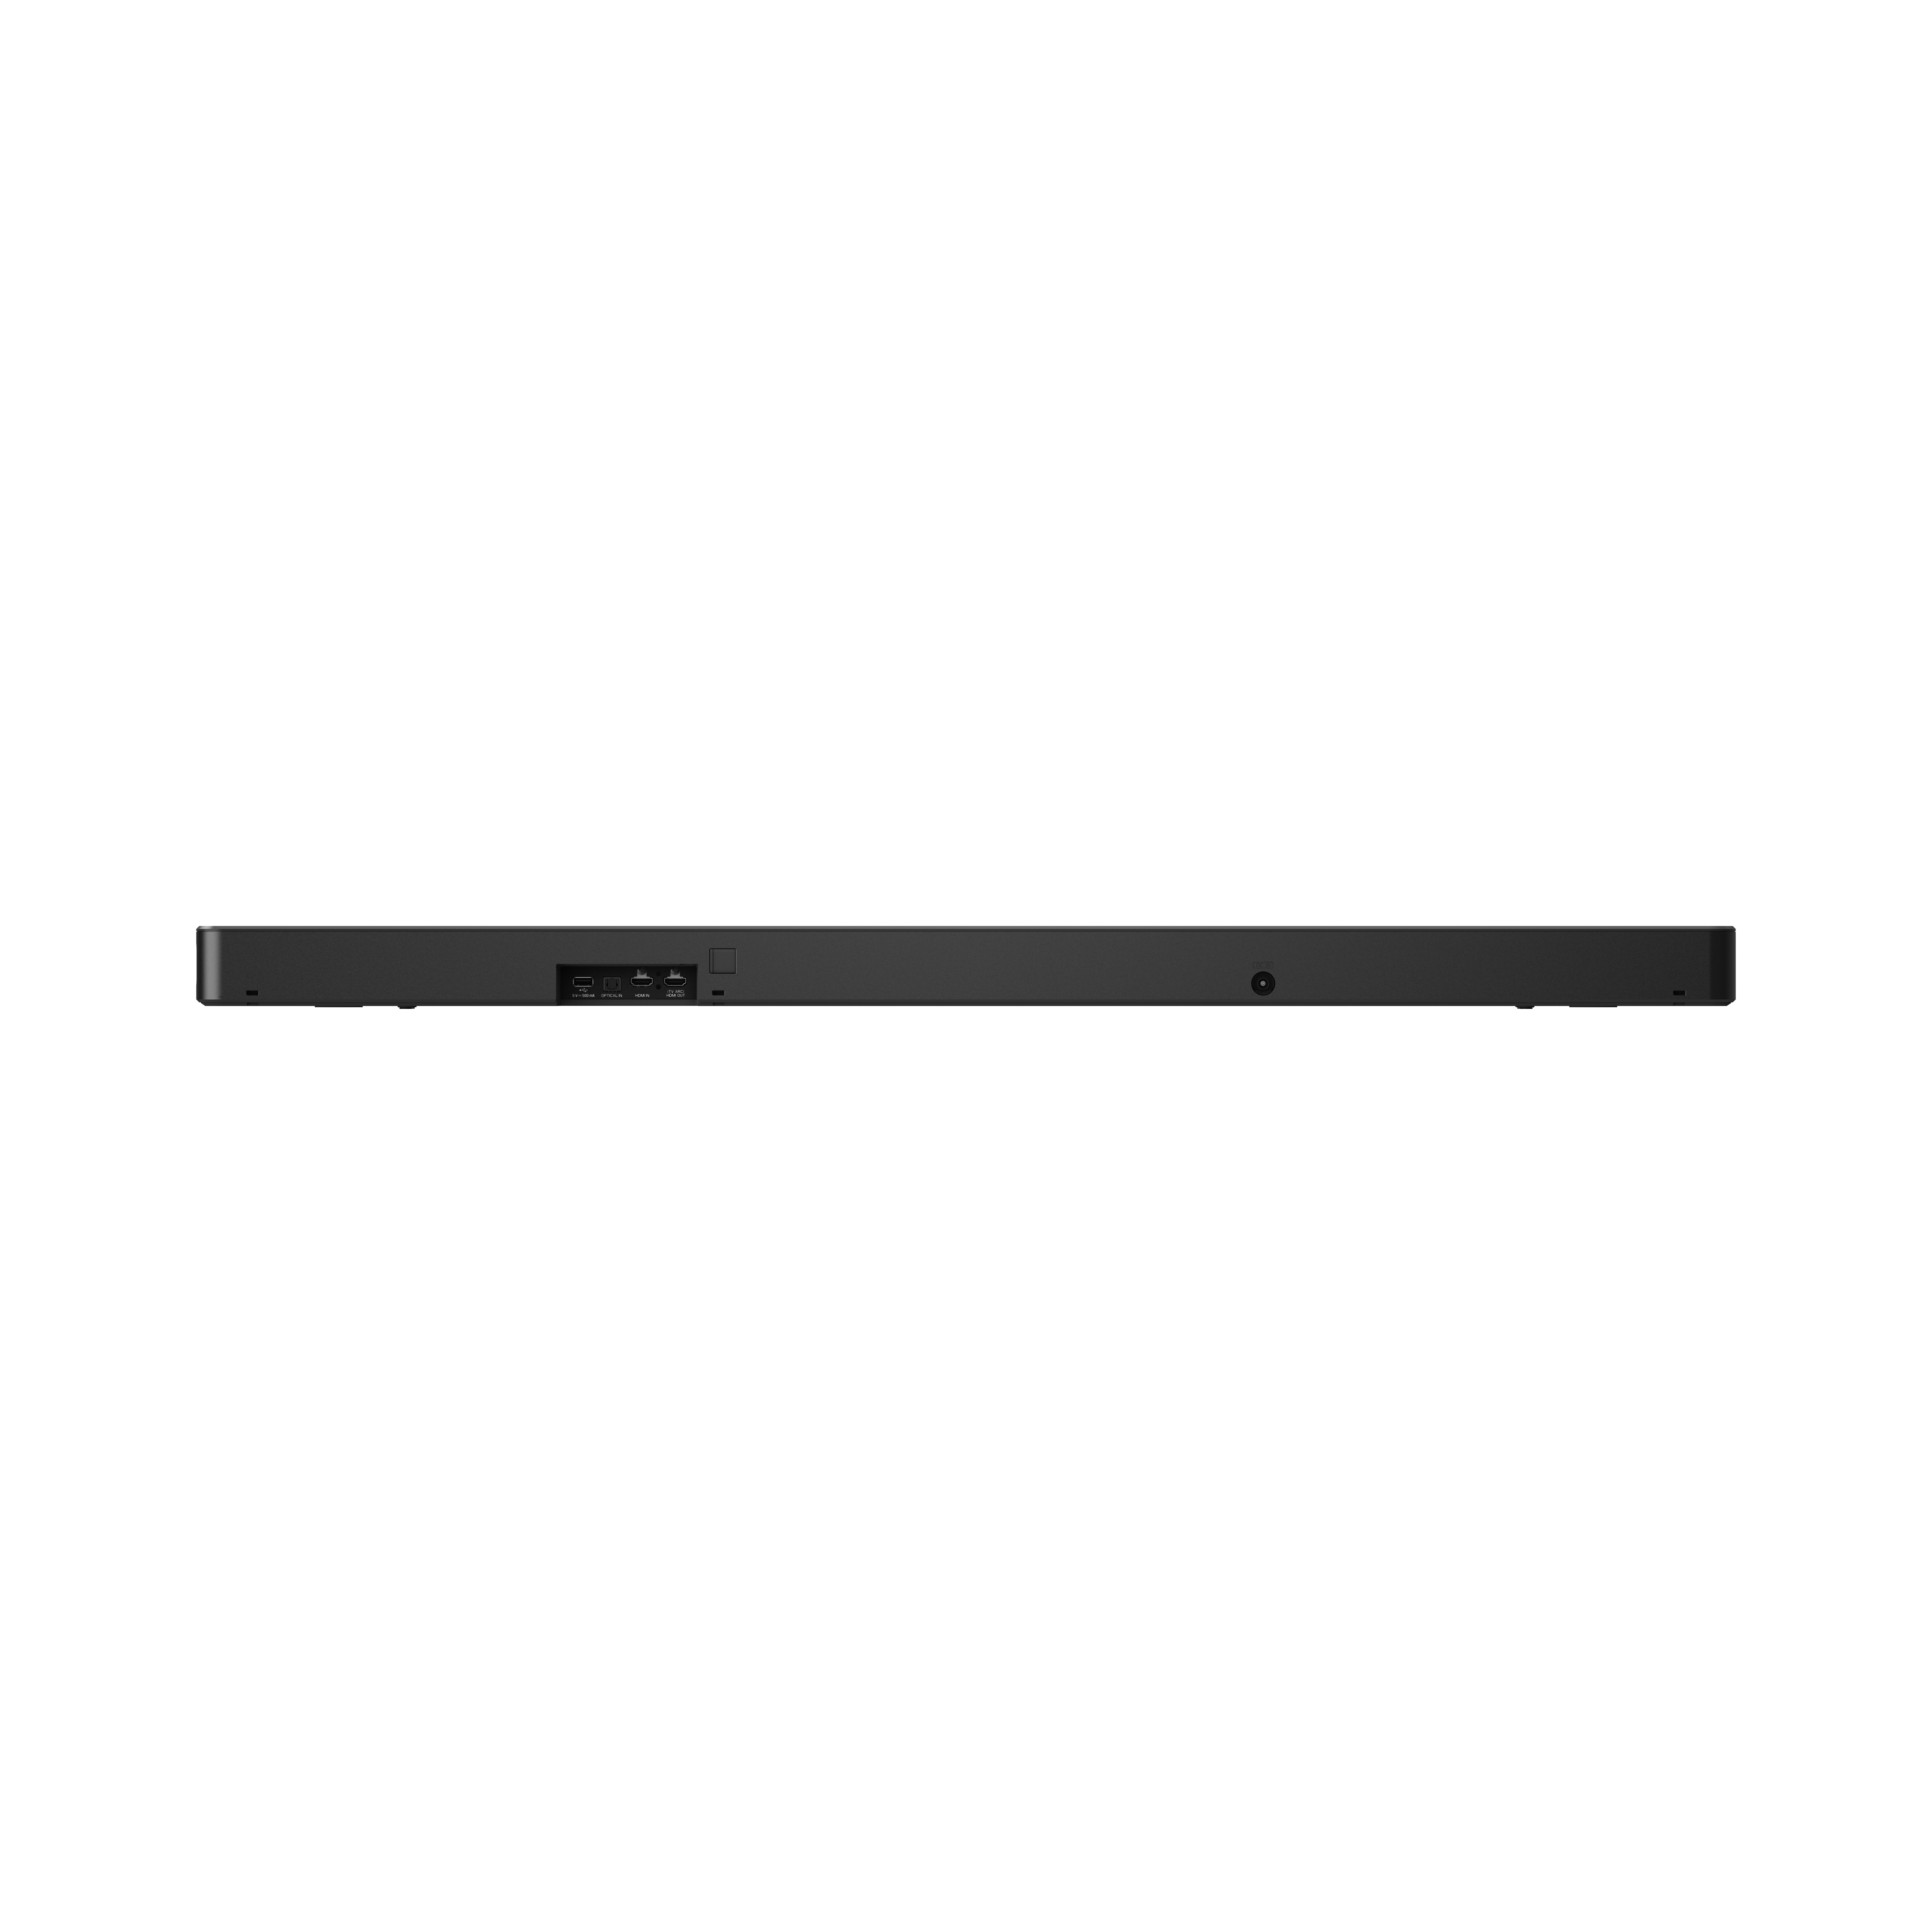 LG 3.1 Channel High Res Audio Sound Bar with DTS Virtual:X - SN6Y - image 3 of 19